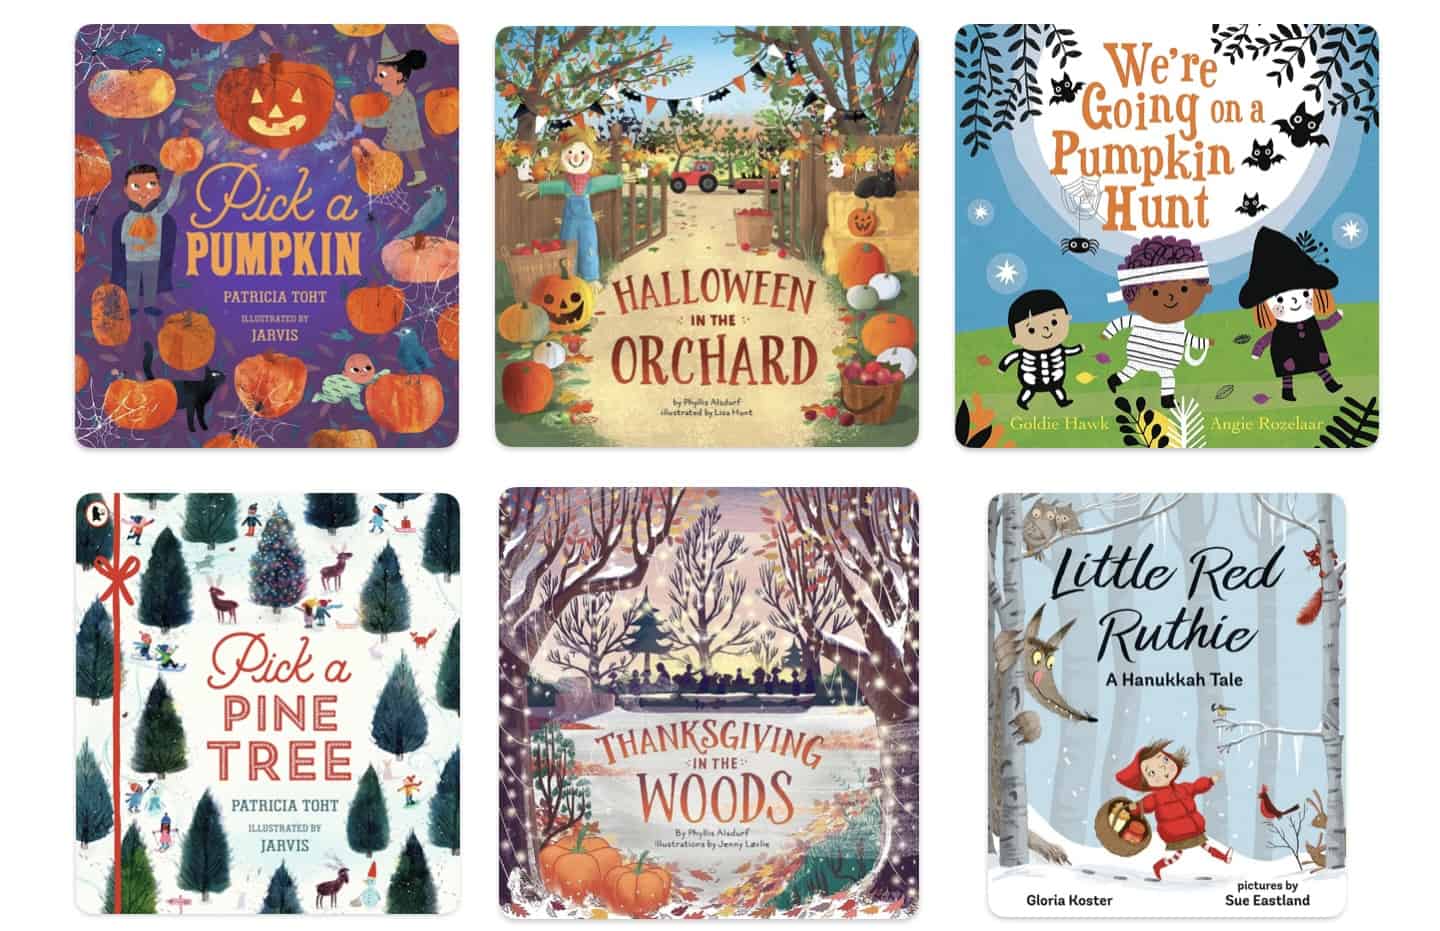 6 books about fall and winter holidays with nature themes